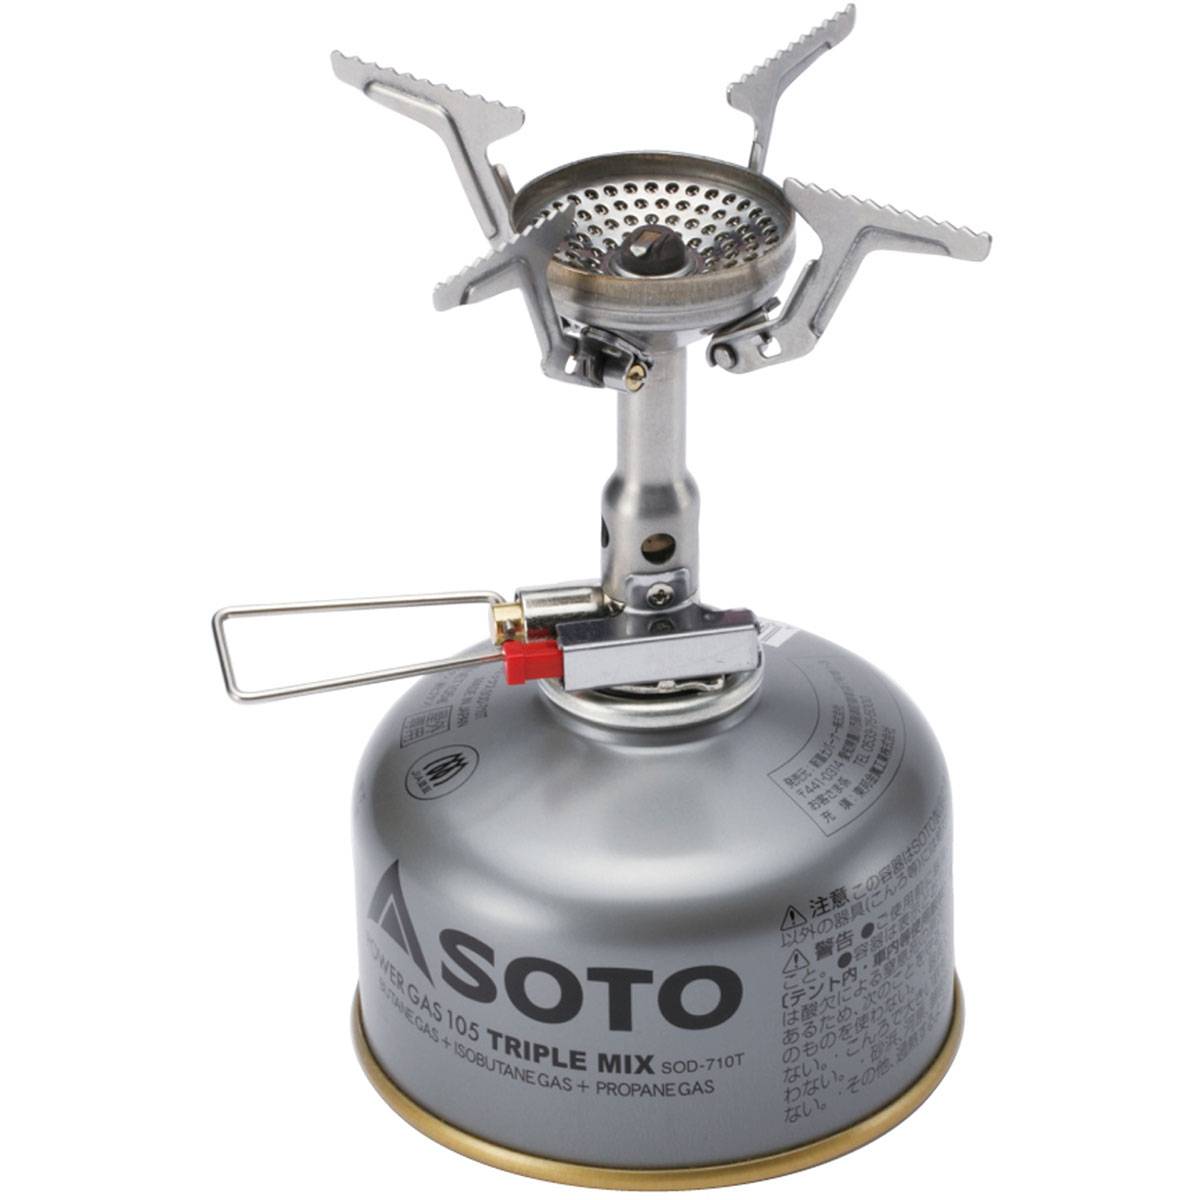 Soto Amicus Stove with  Stealth Ignitor - Tramping Food and Accessories sold by Venture Outdoors NZ